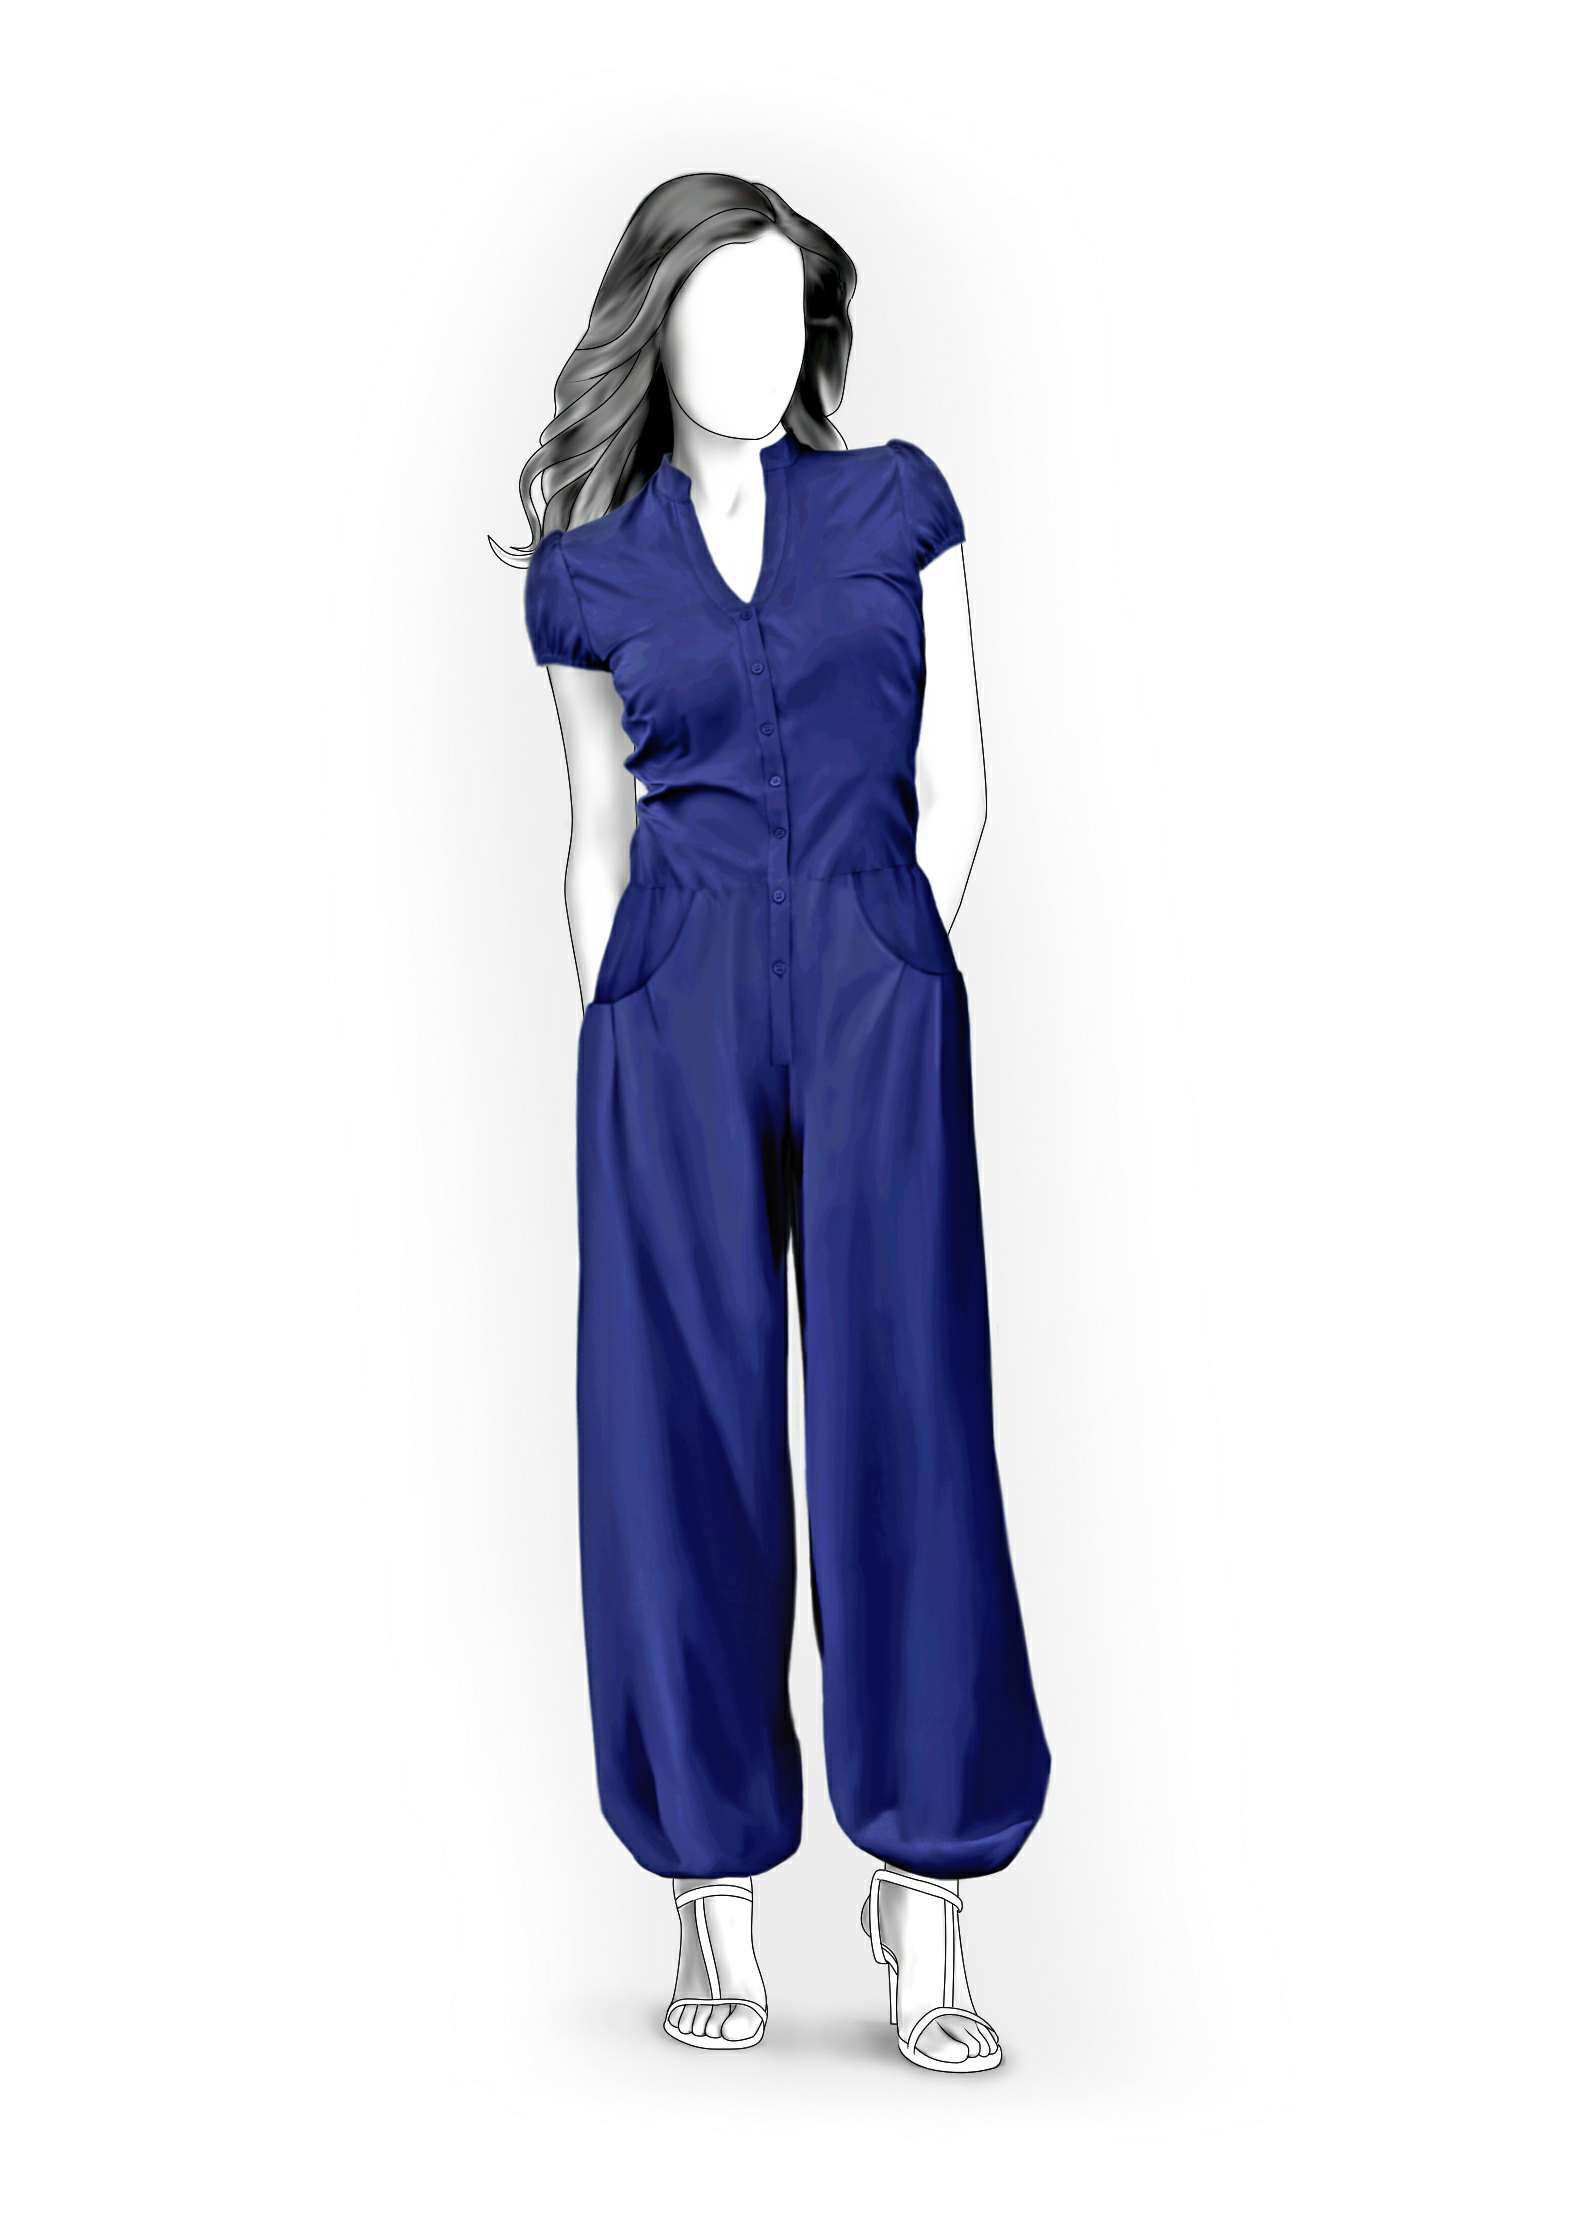 Jumpsuit With Decorative Pockets Sewing Pattern 4044. Madeto